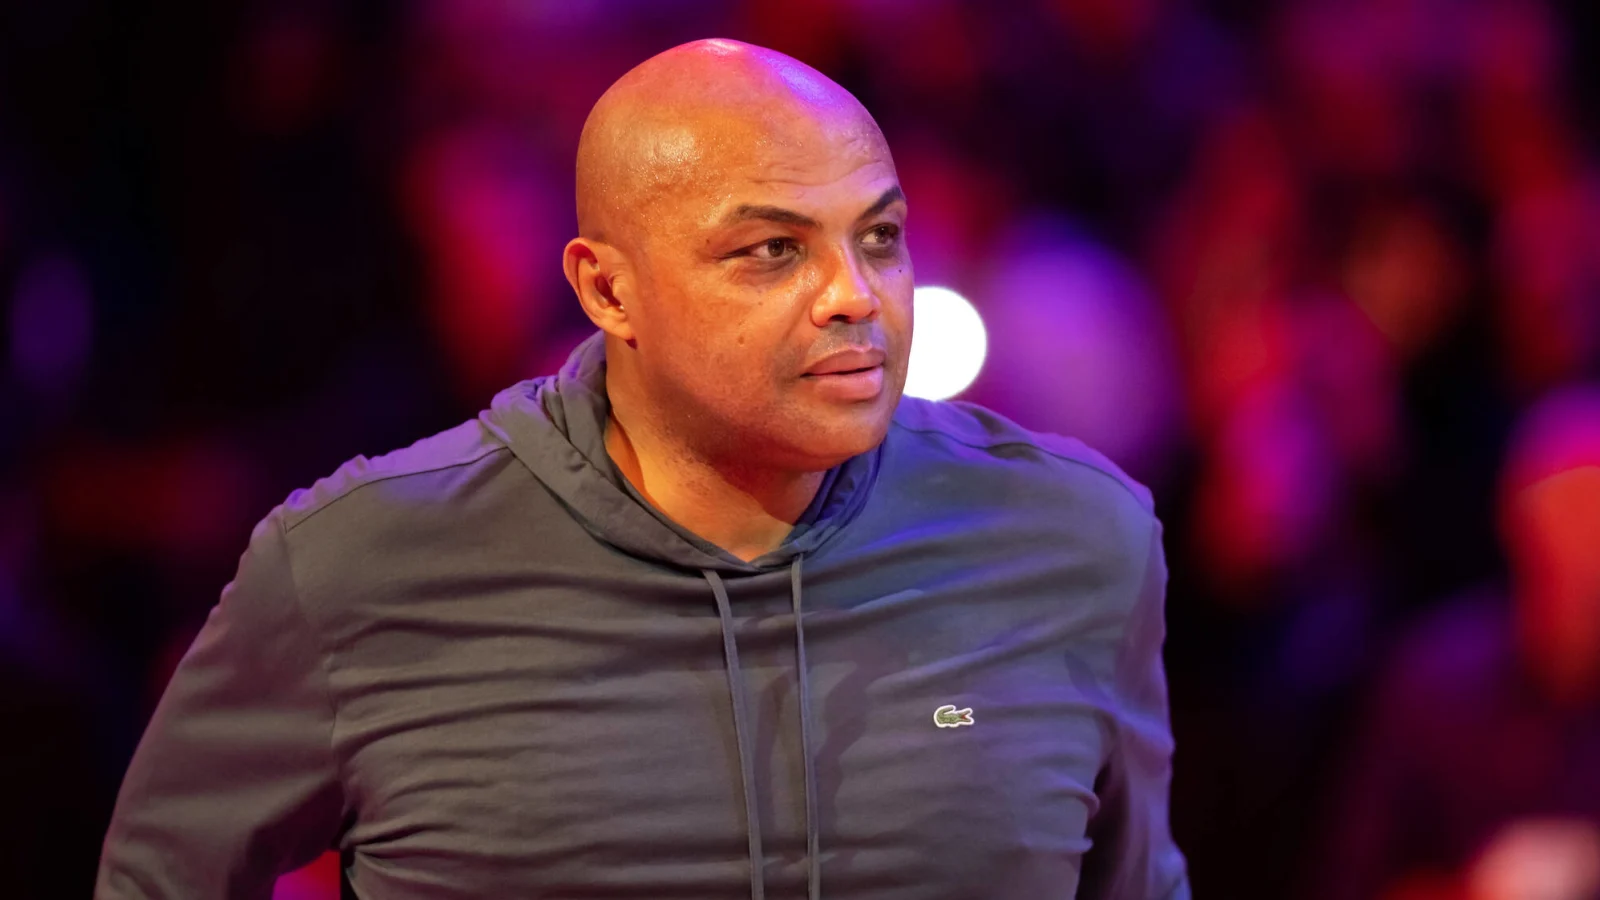 Charles Barkley's Unofficial Retirement and the Future of 'Inside the NBA'